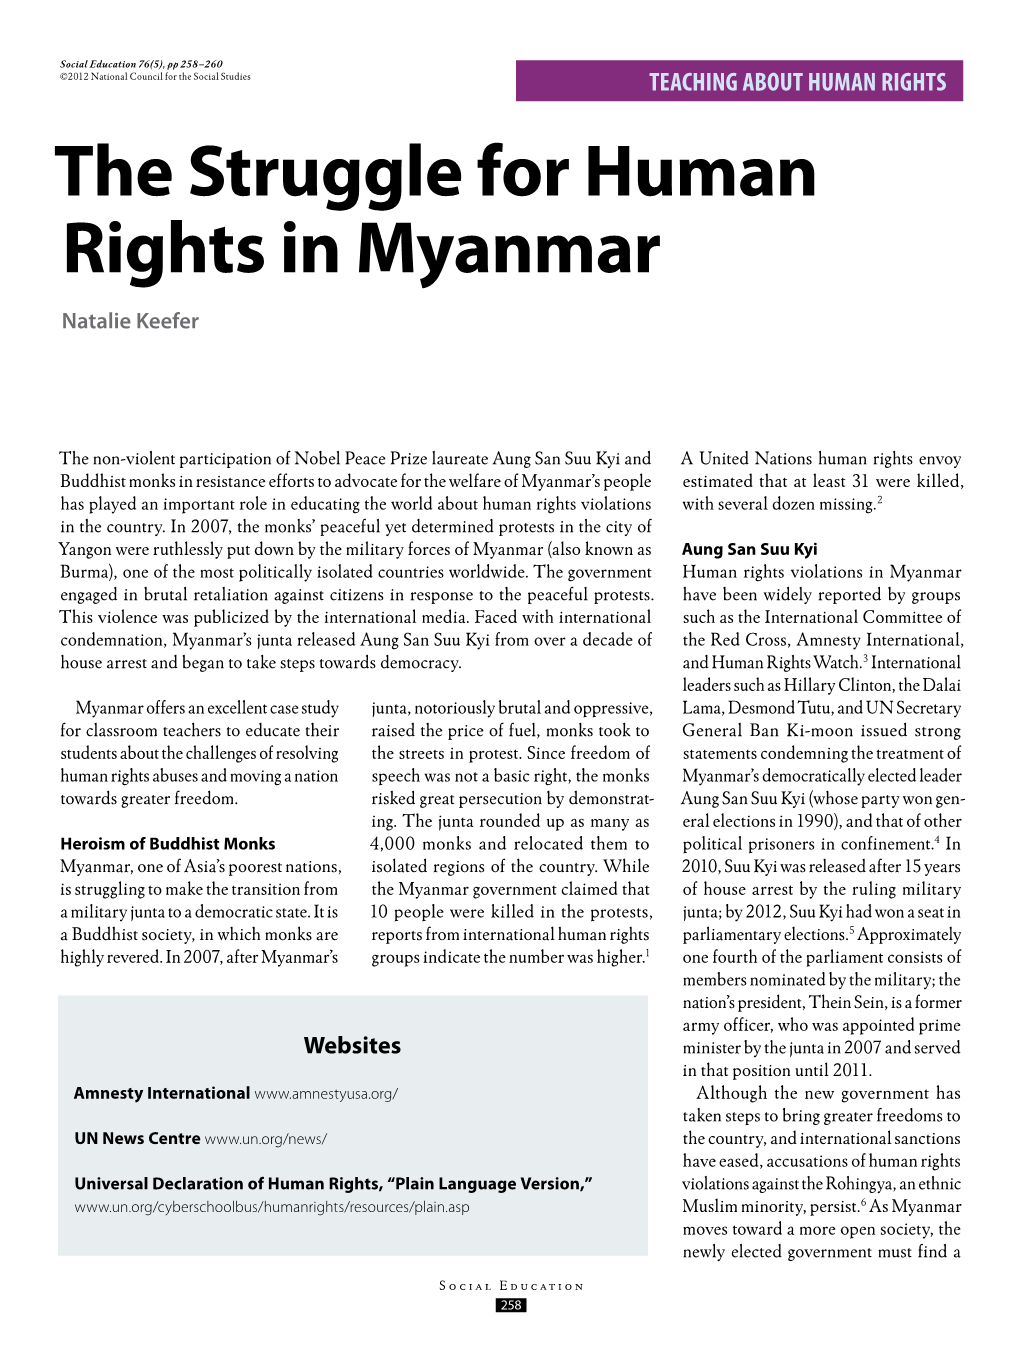 The Struggle for Human Rights in Myanmar Natalie Keefer